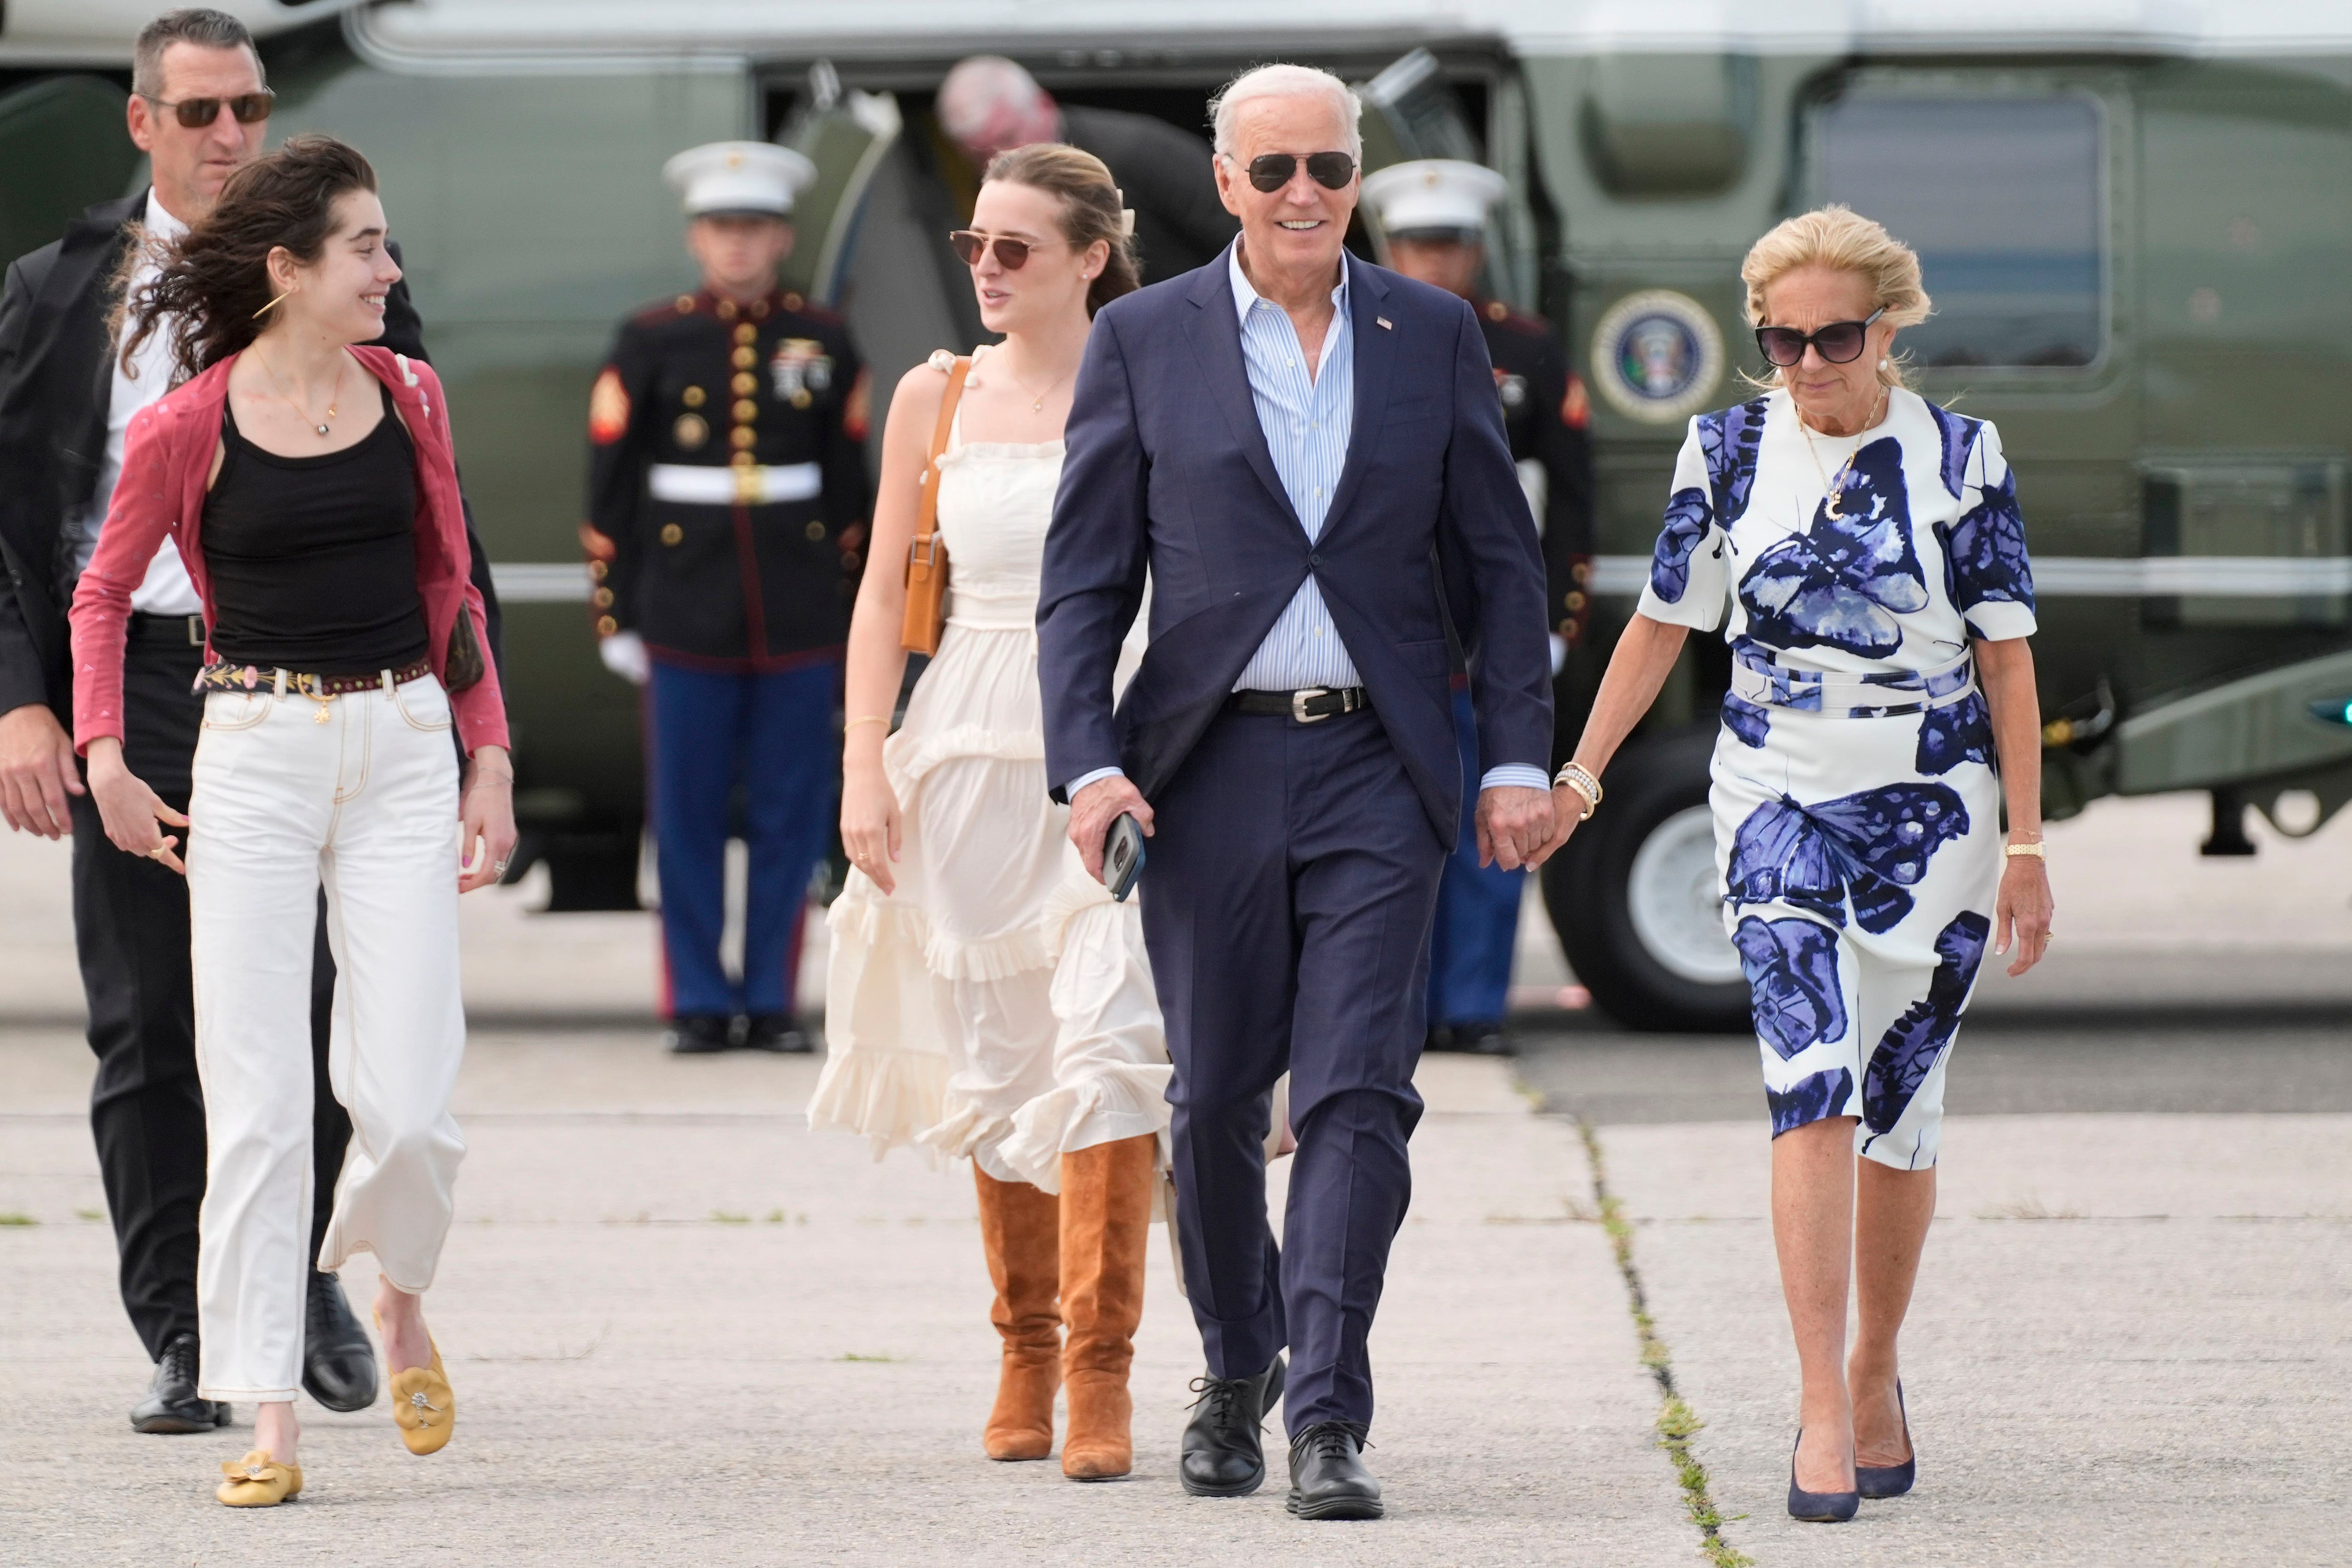 Biden campaign's reset after disastrous debate looks a lot like business as usual thumbnail